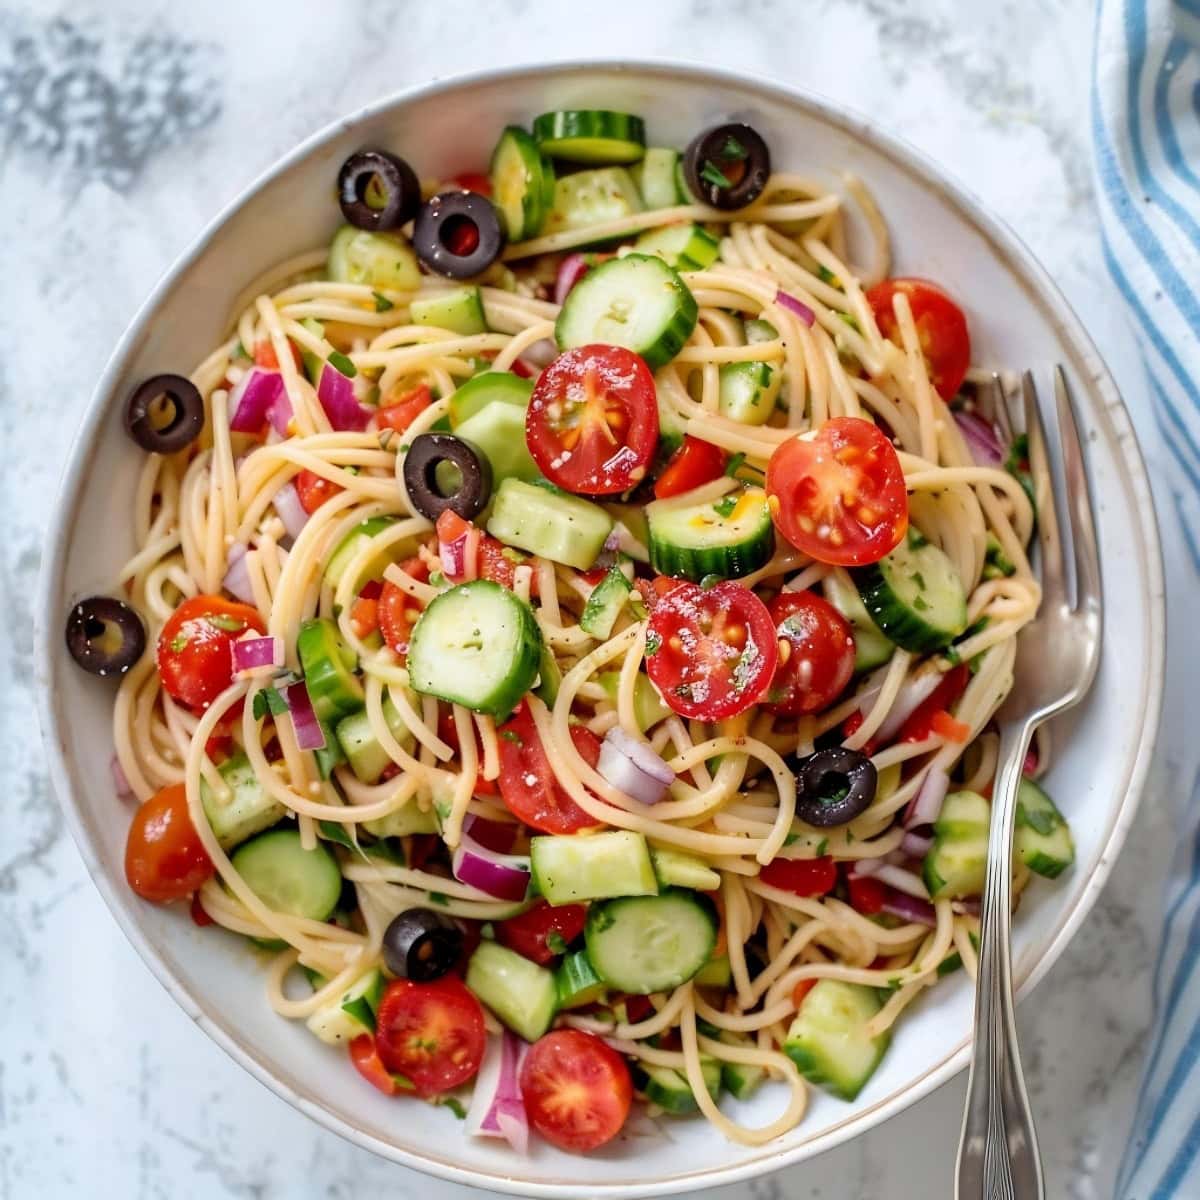 Colorful California pasta salad featuring cucumbers, cherry tomatoes and black olives.